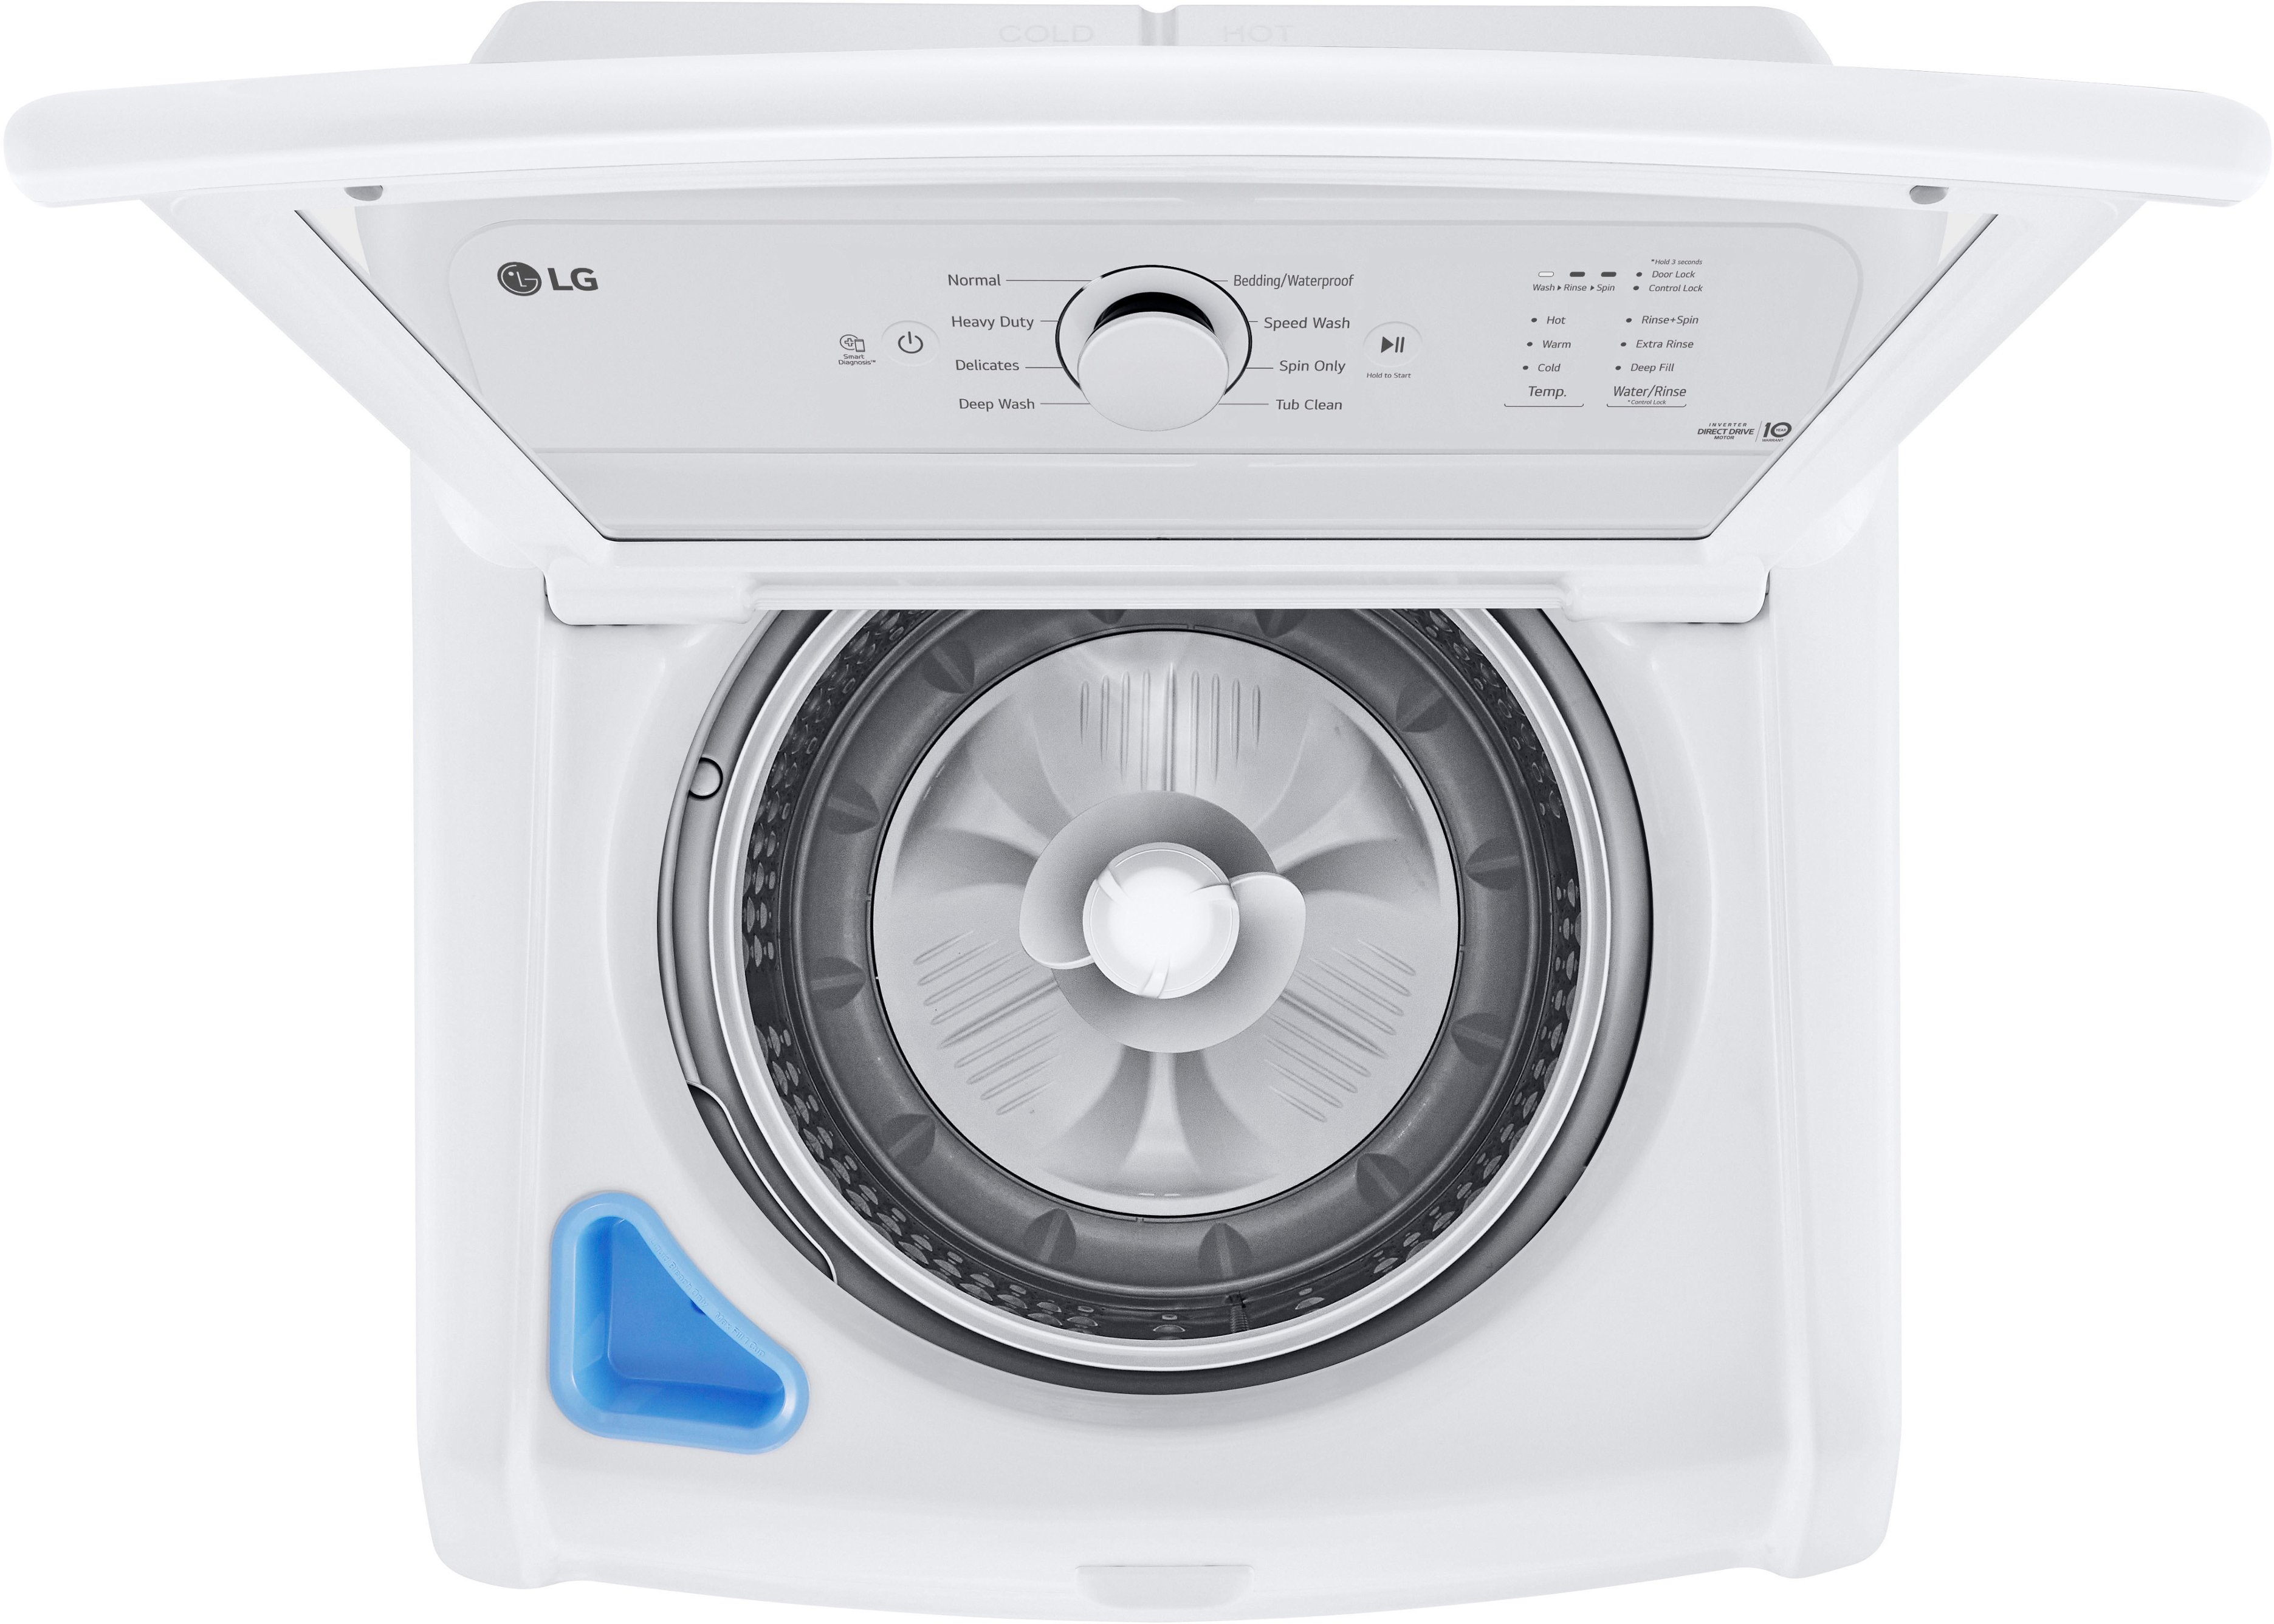 LG 4.1 Cu. Ft. Top Washer - with White WT6105CW Load Lid Glass Best Buy SlamProof